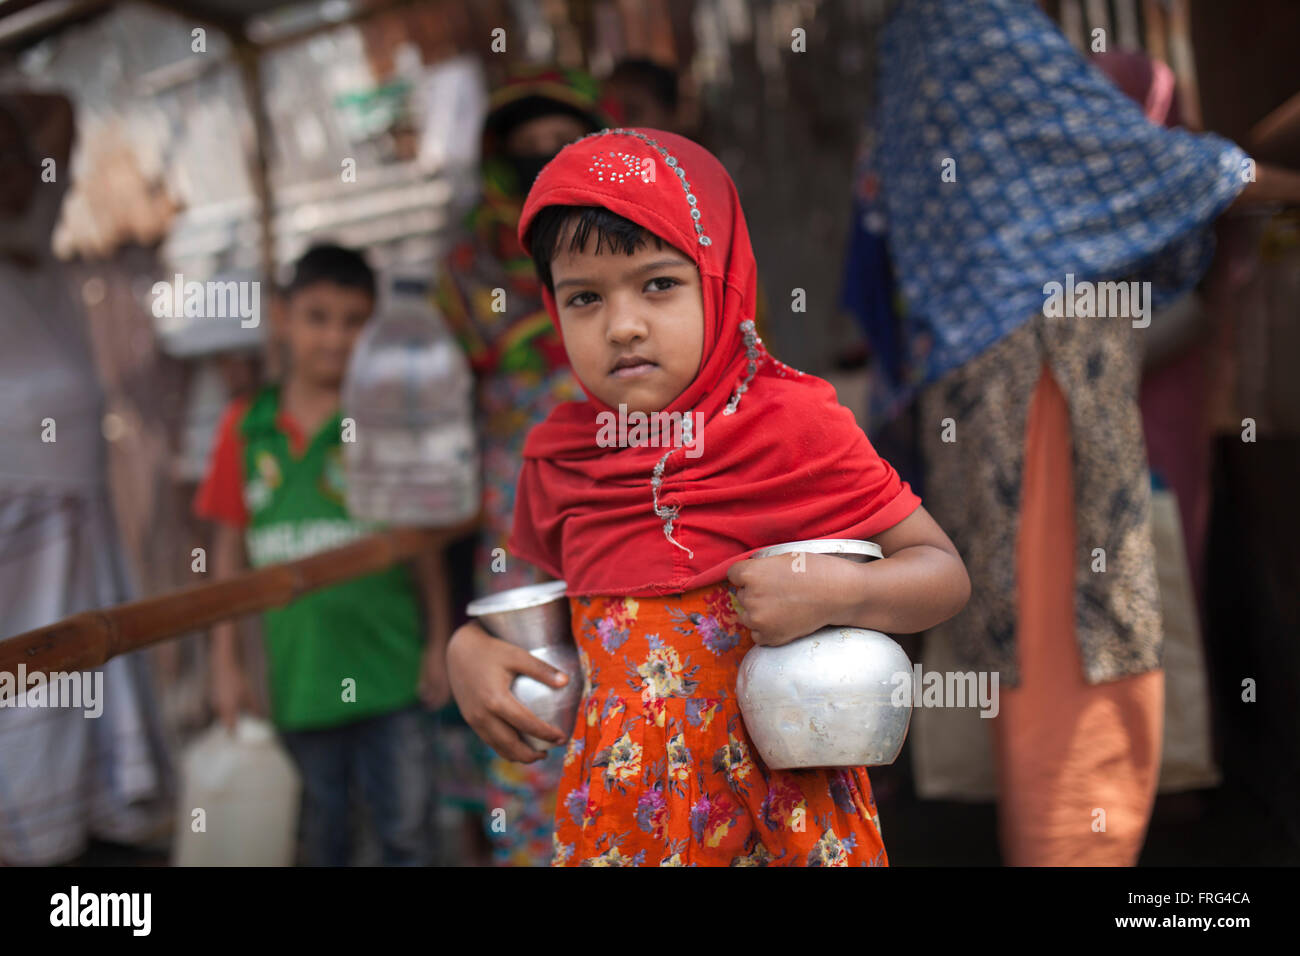 Dhaka, Bangladesh. 22nd March, 2016. A child collects drinkable water from a tanker in Dhaka, Bangladesh on March 22, 2016. Millions of inhabitants of Dhaka face severe water crisis during the blistering summer months.Safe drinking water crisis has become one of the major and common problems now-a-days in Bangladesh, especially in Dhaka city. Credit:  zakir hossain chowdhury zakir/Alamy Live News Stock Photo